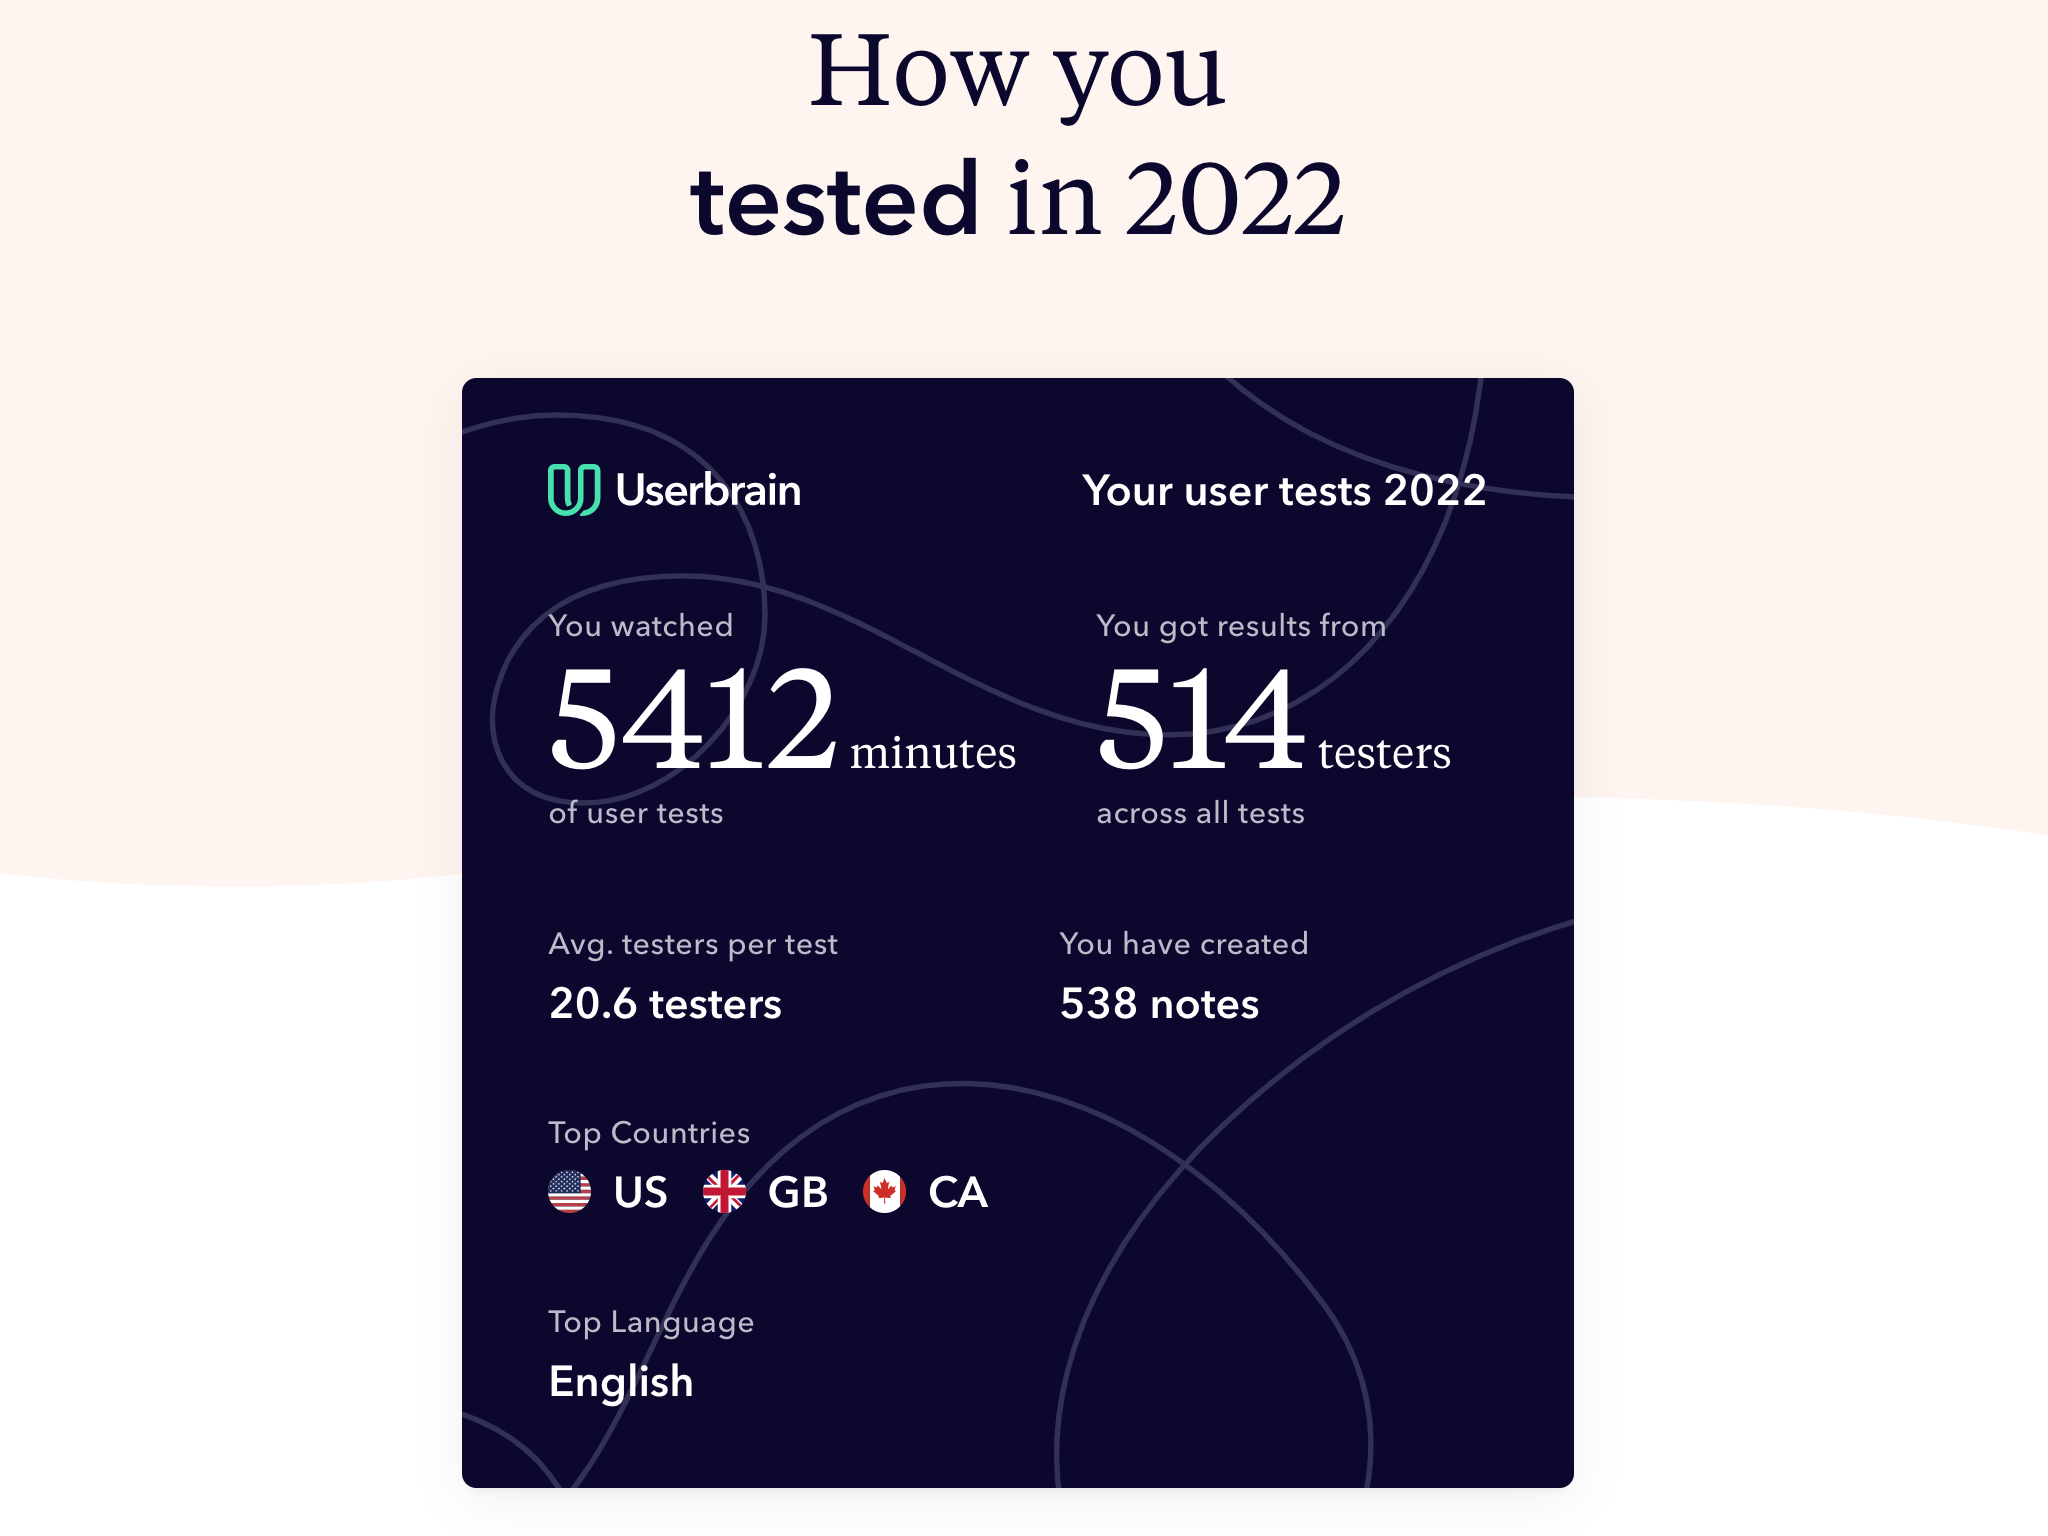 Userbrain Wrapped 2022 - How you tested in 2022